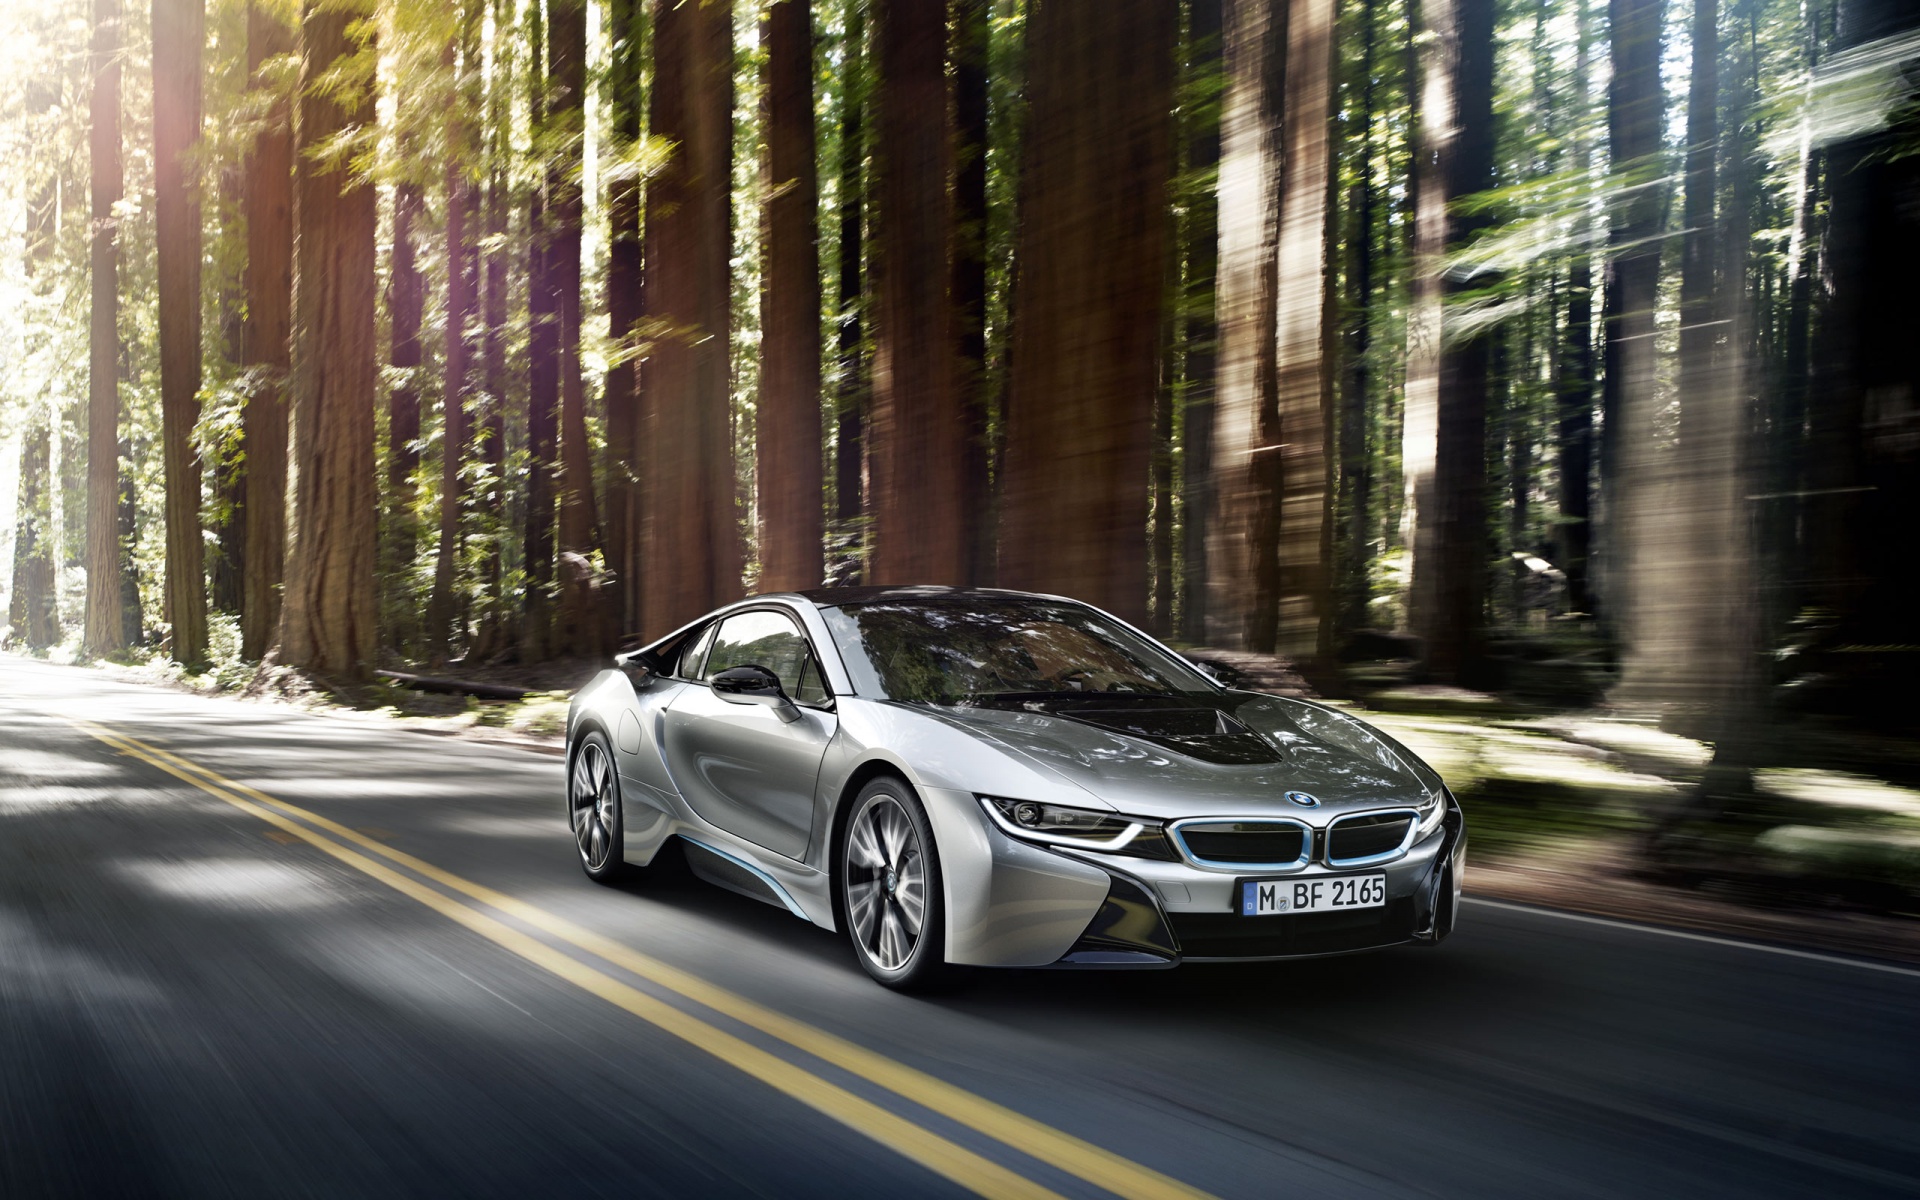 Awesome BMW i8 Wallpaper